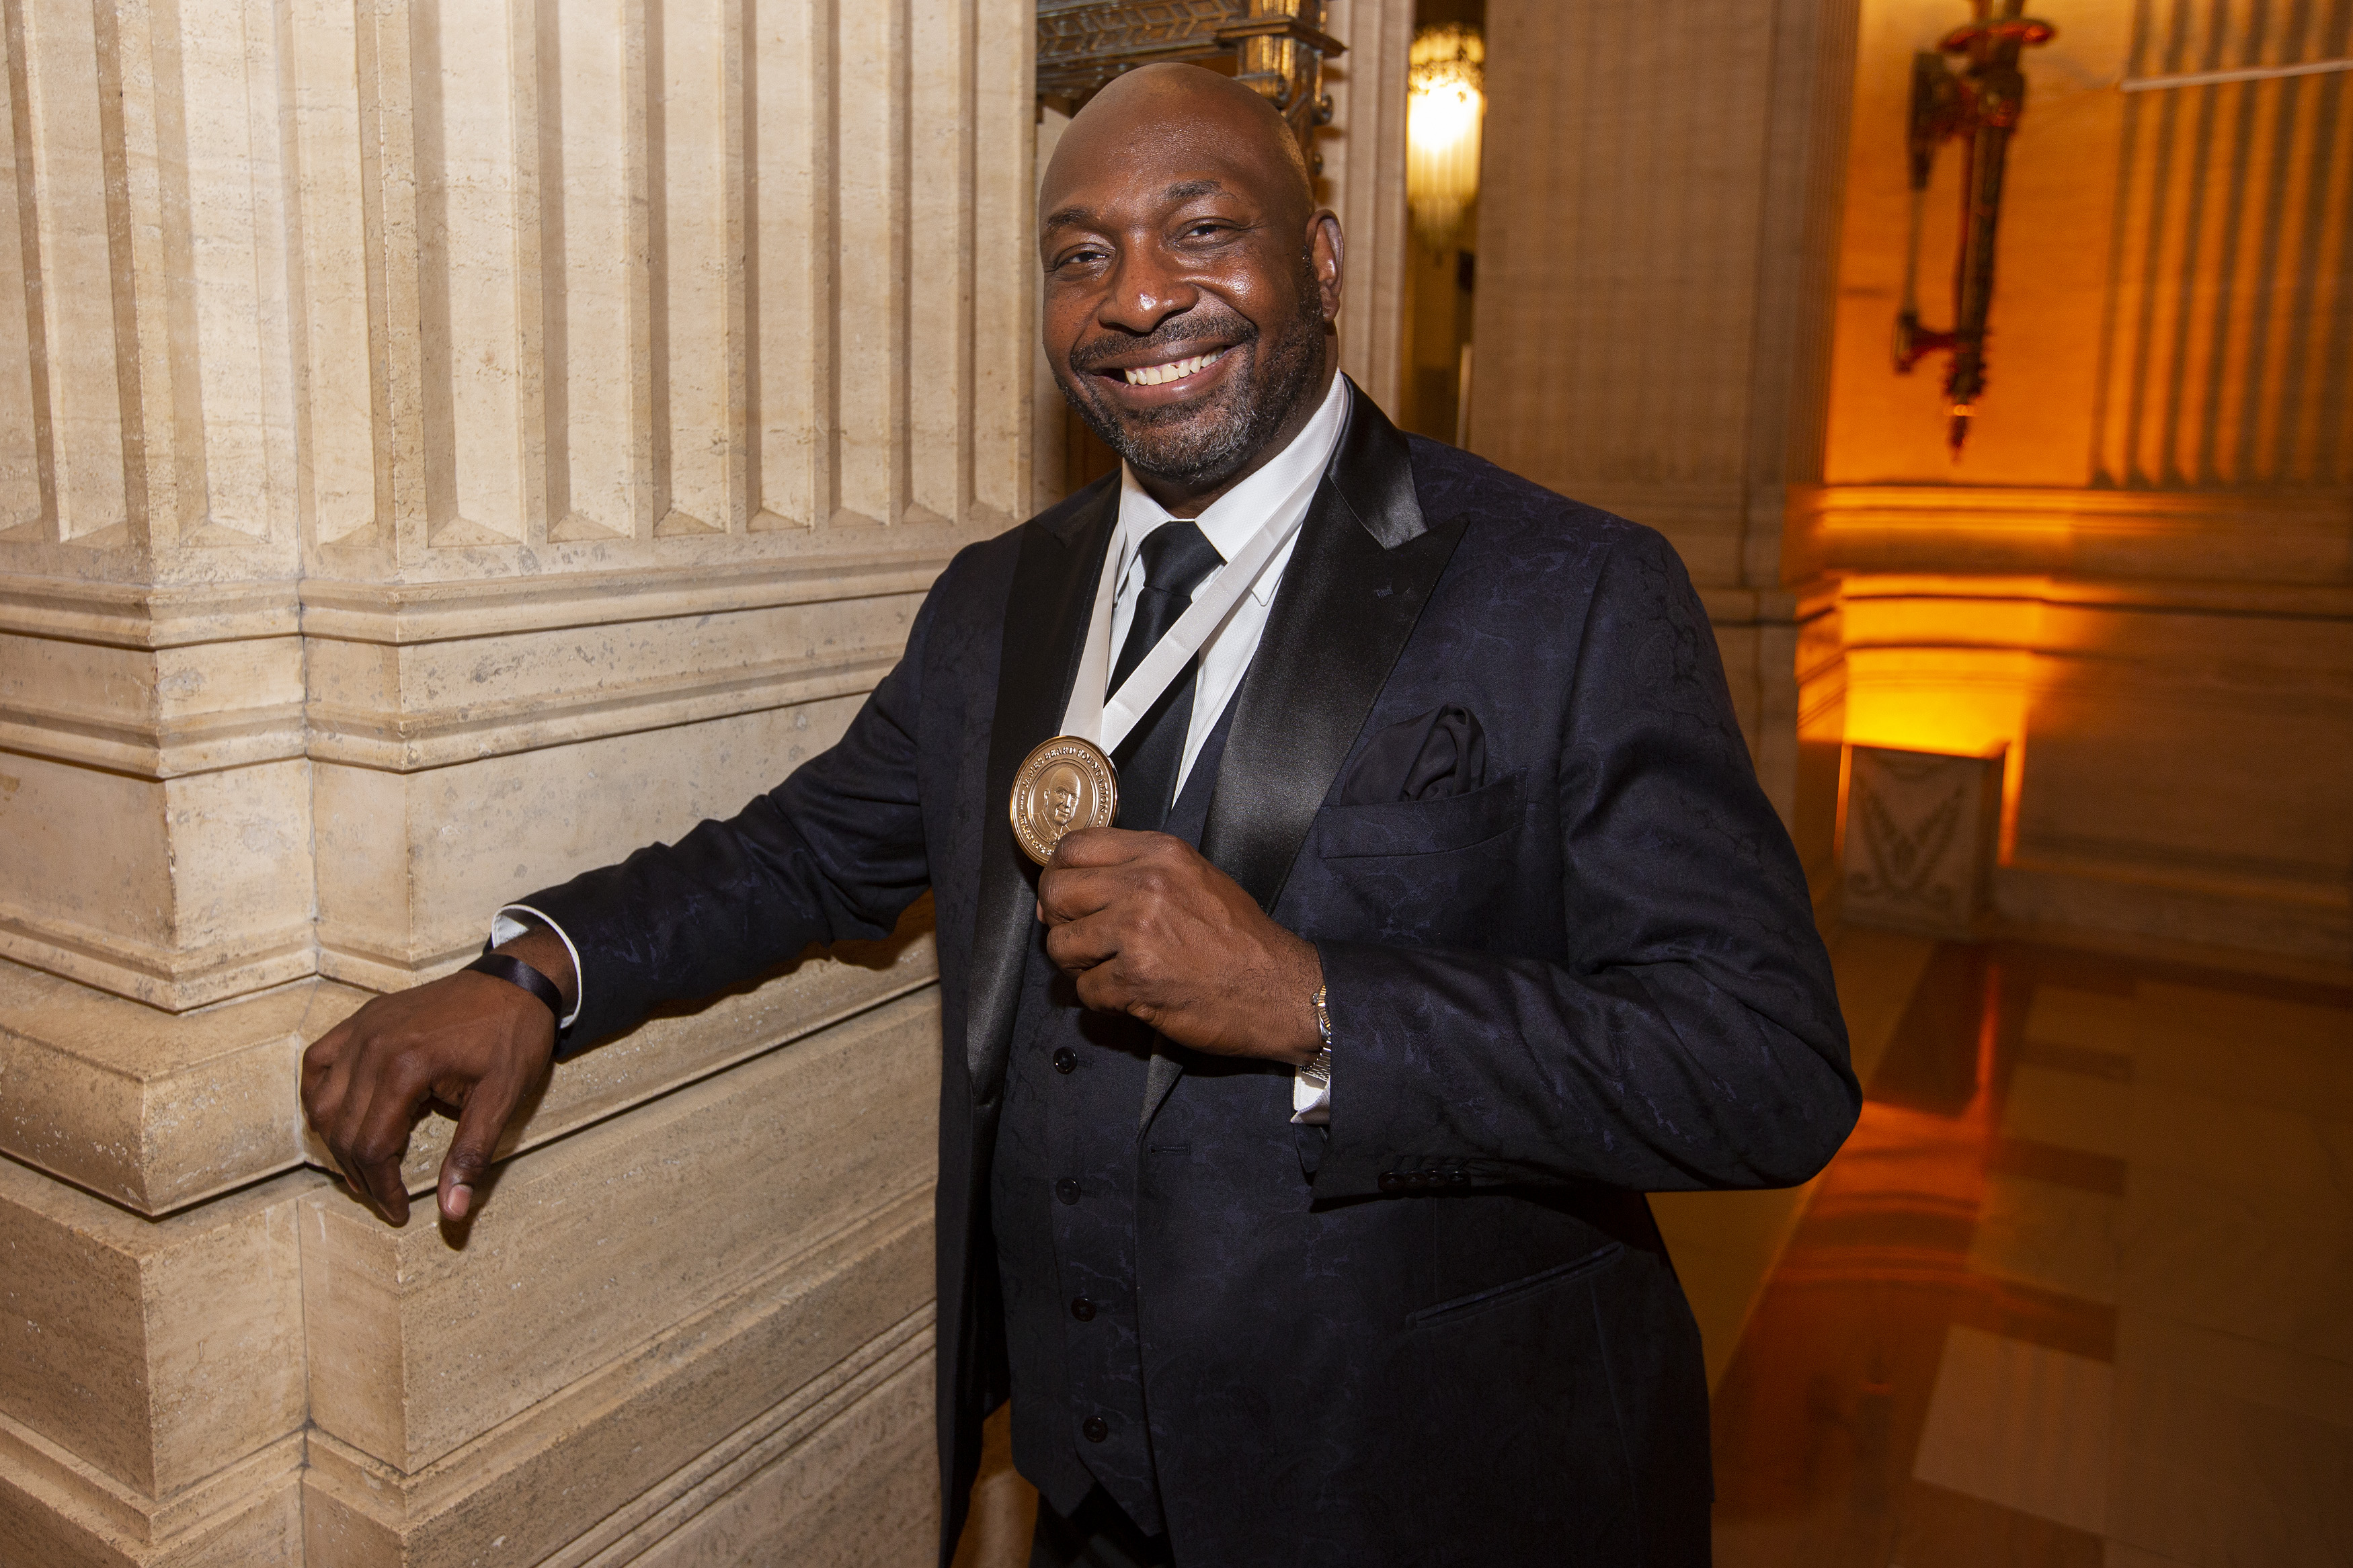 A Black man in a suit poses, smiling, with his James Beard Award medal.